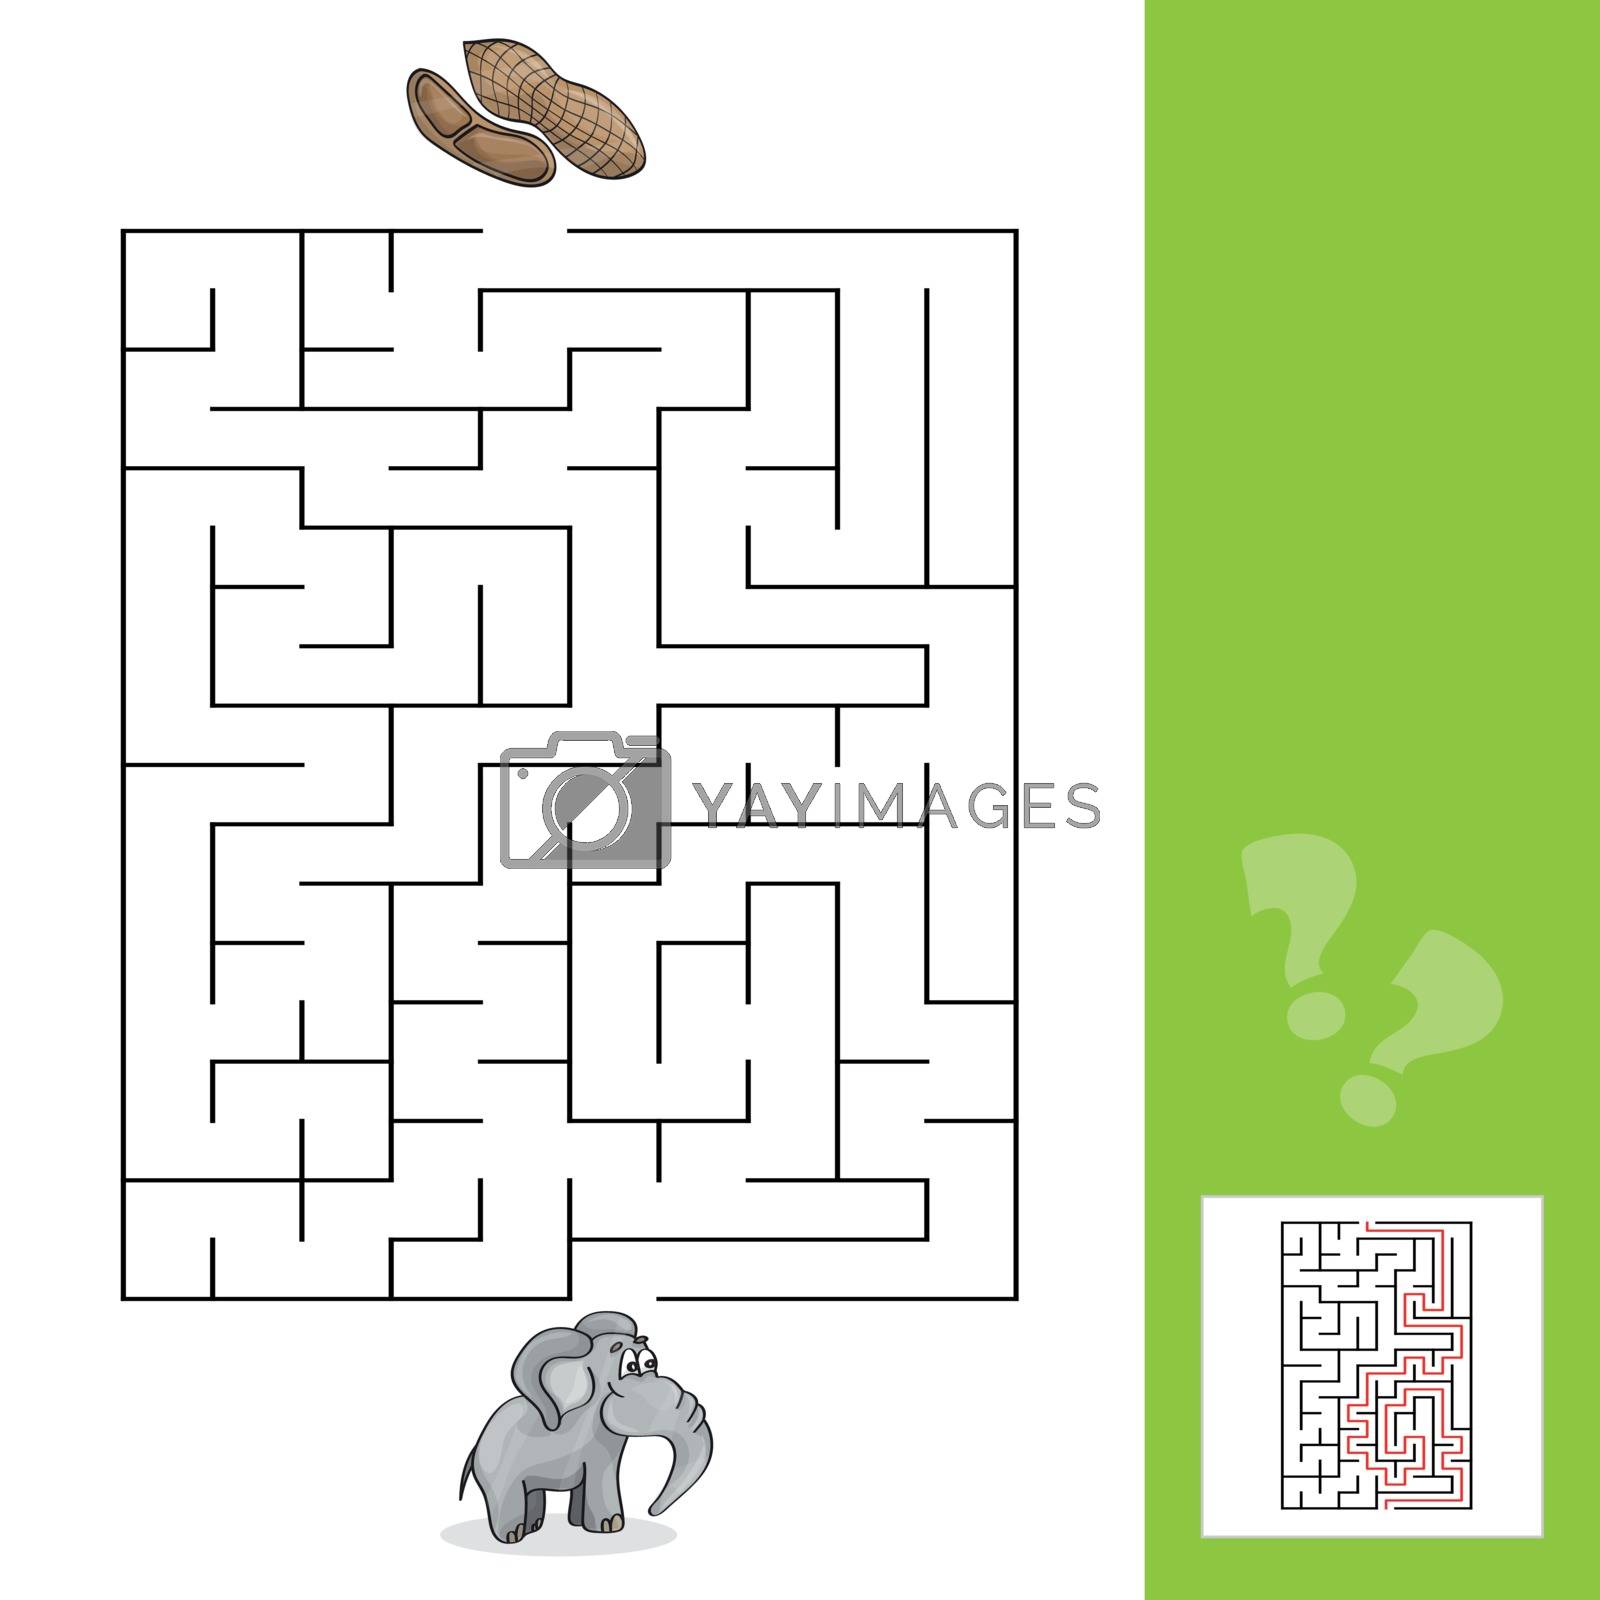 Royalty free image of Education Maze or Labyrinth Leisure Game with Elephant and Peanuts with answer by natali_brill